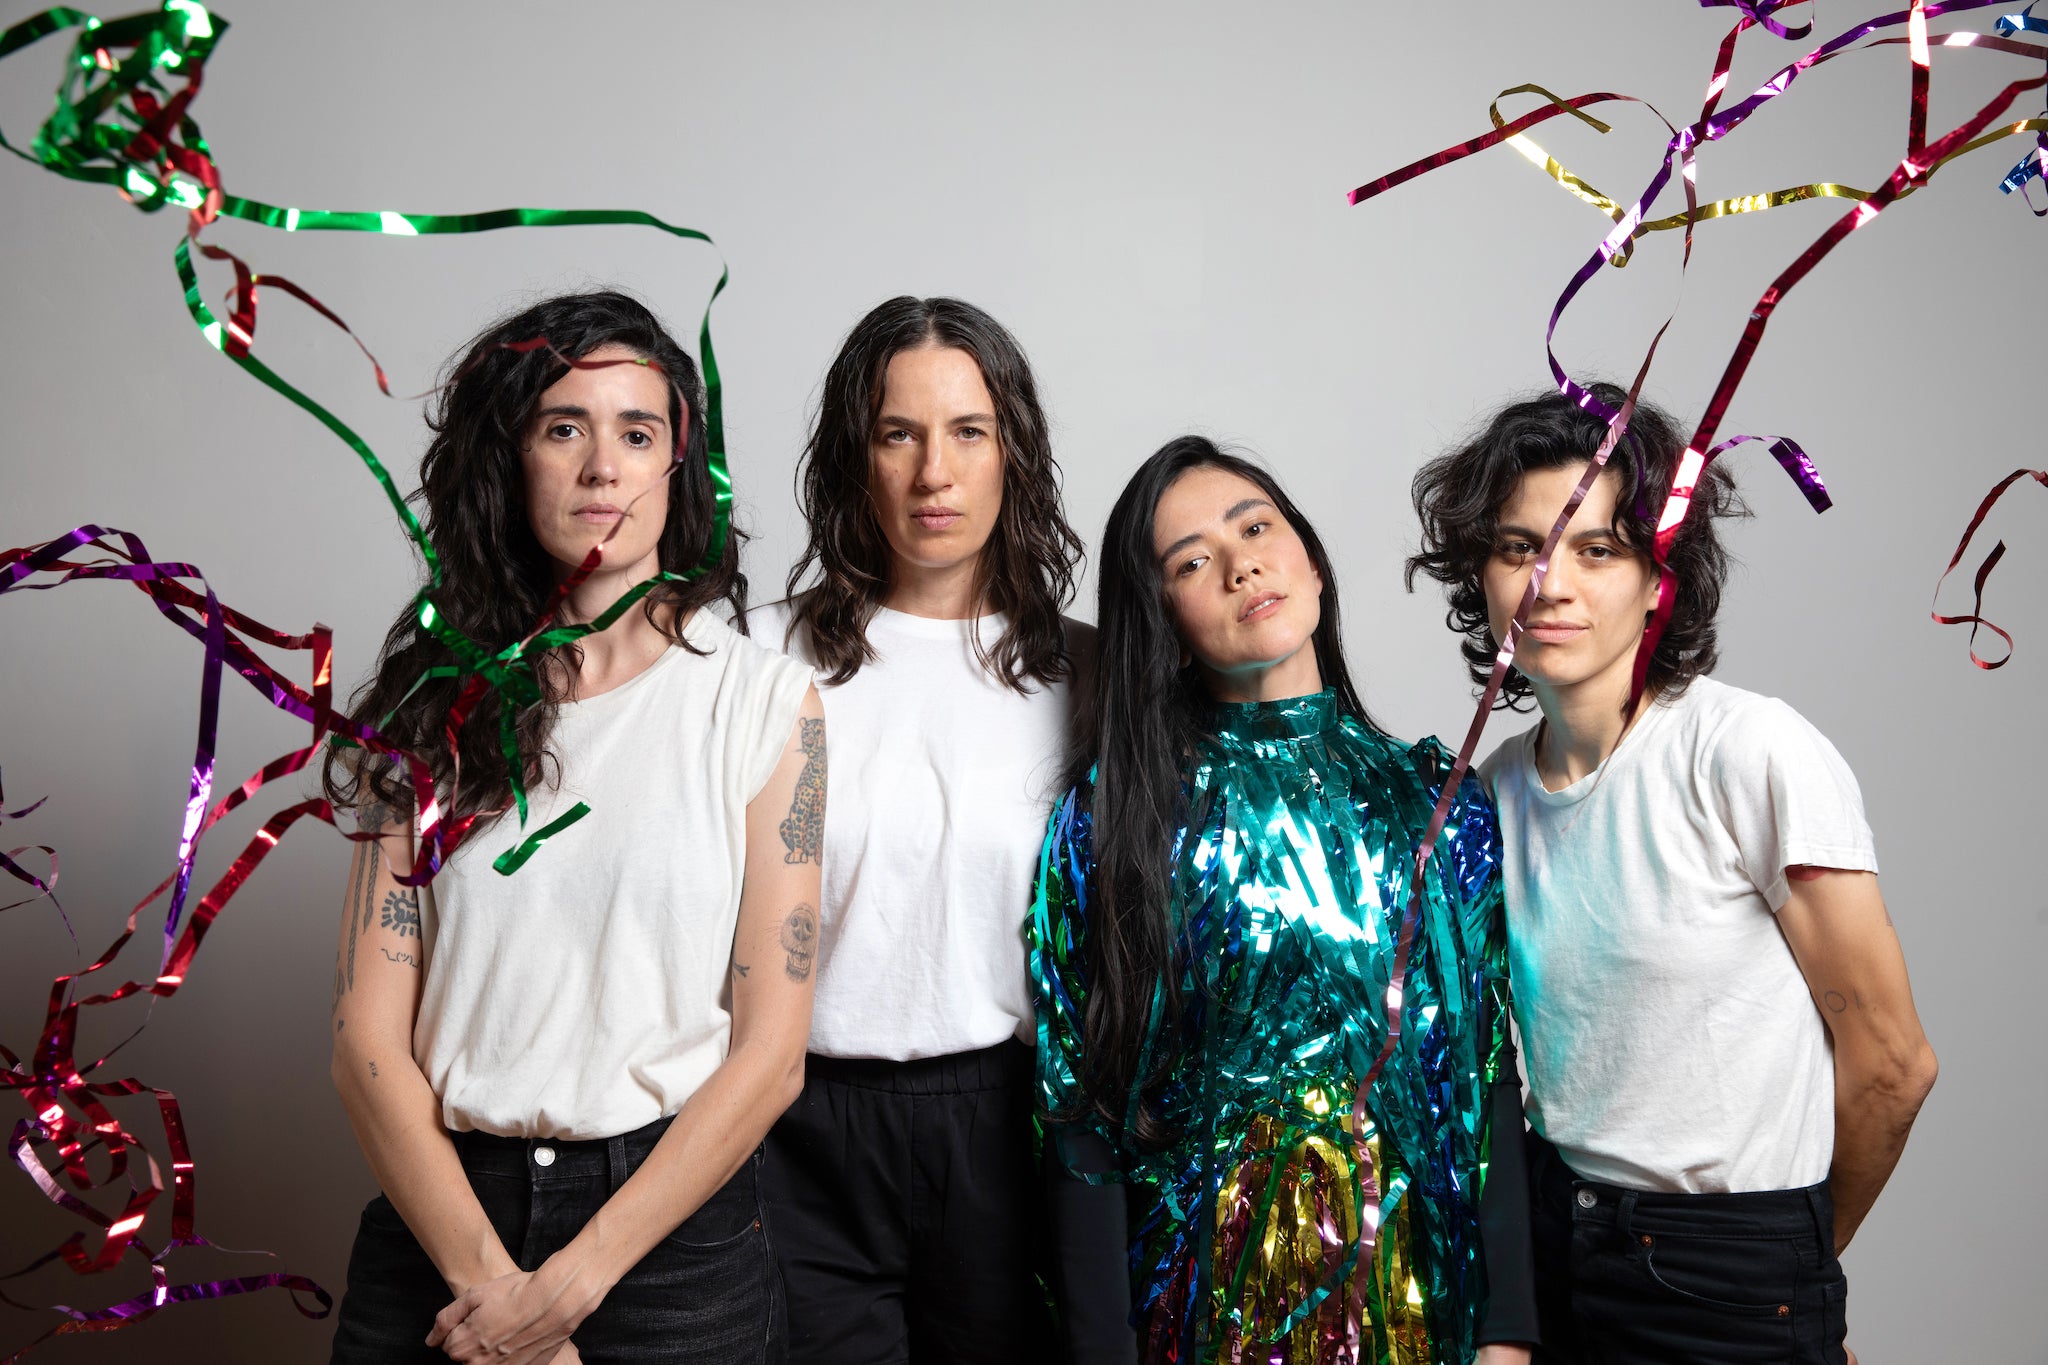 Brazilian electropop group CSS: ‘We were so tired after shows, and we weren’t going to do drugs just to go to an afterparty’